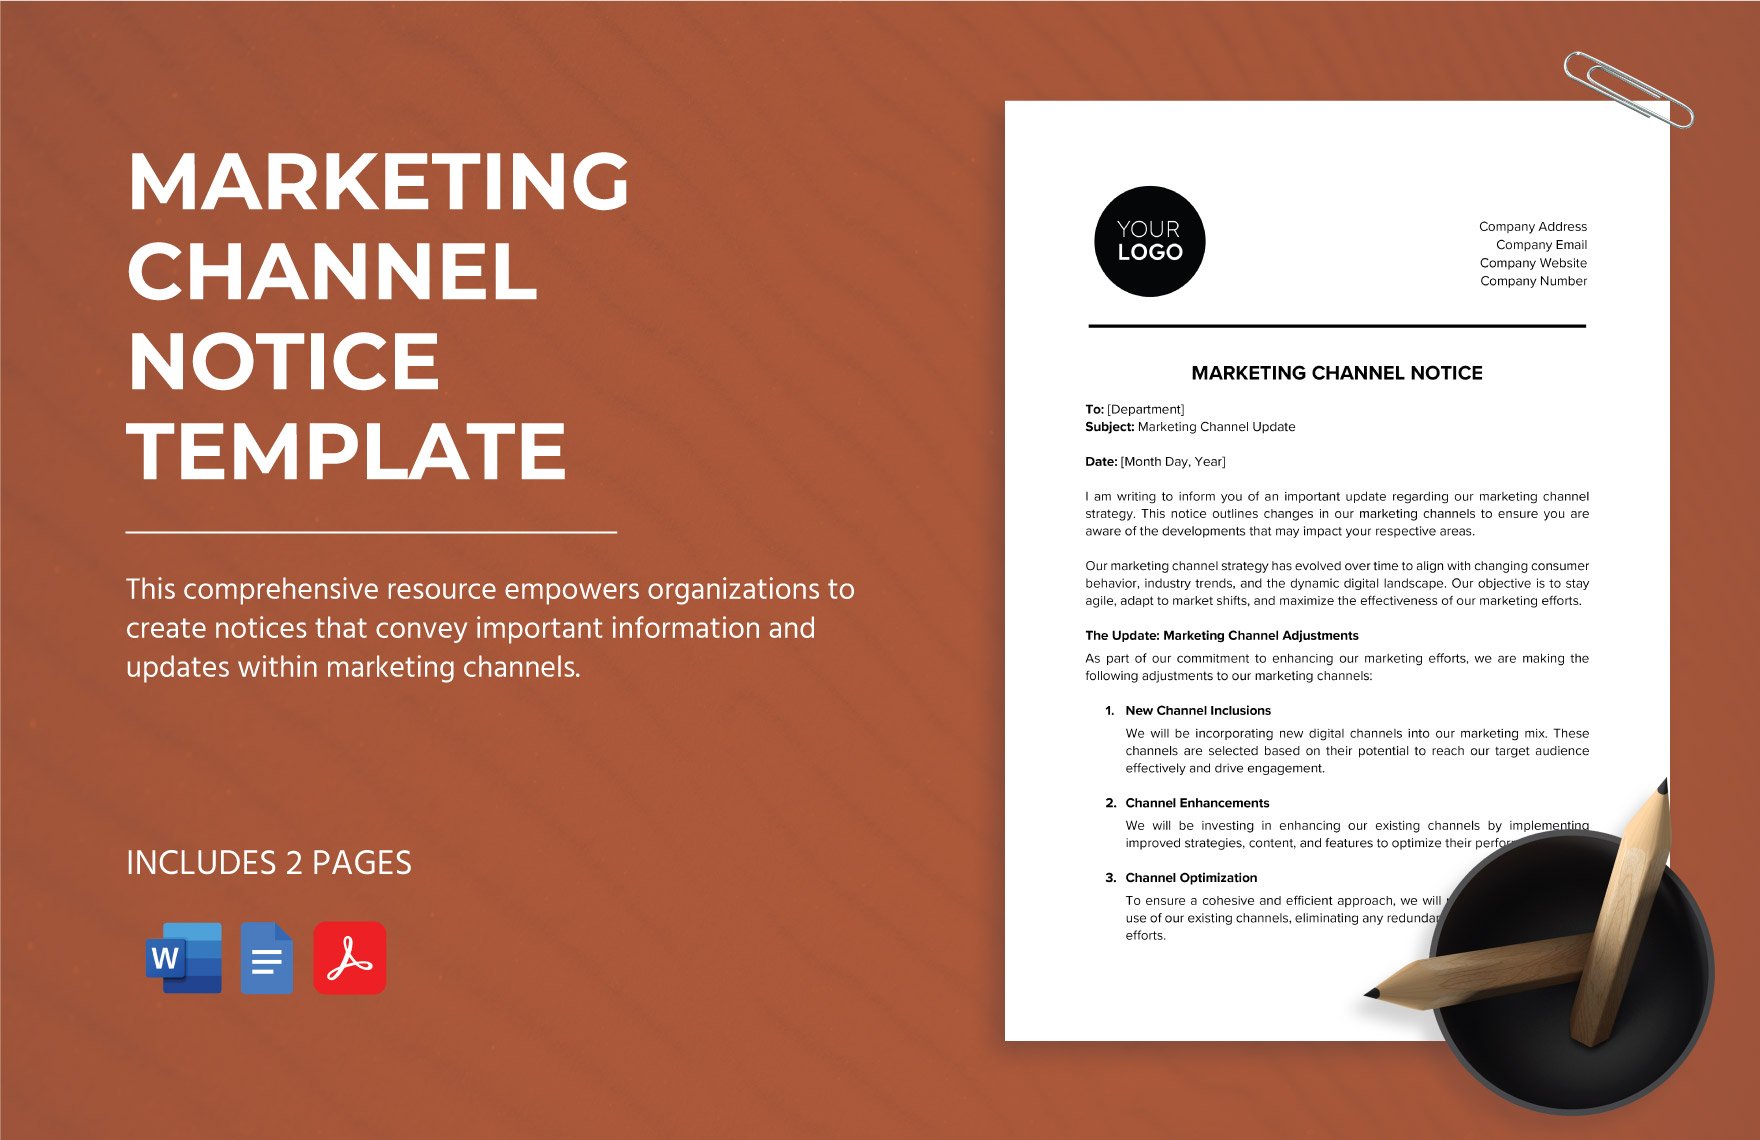 Marketing Channel Notice Template in Word, Google Docs, PDF